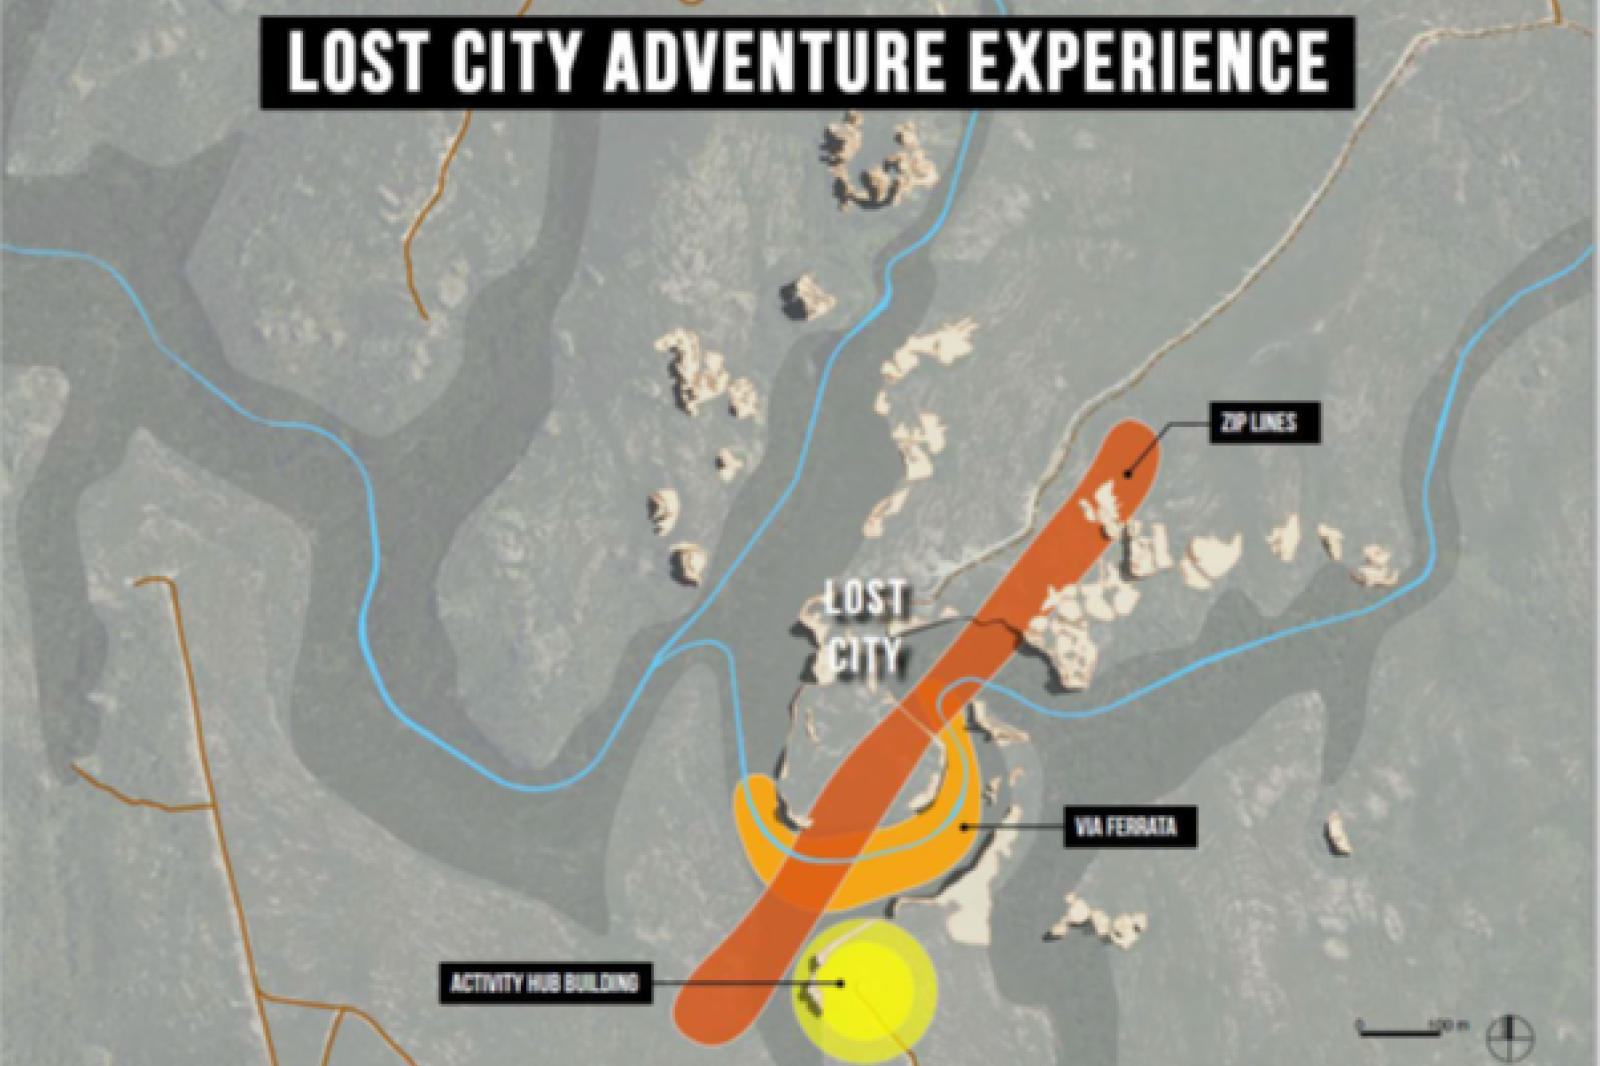 Adventure facilities and building in middle of Lost City view – NPWS illustration from the tourism EoI